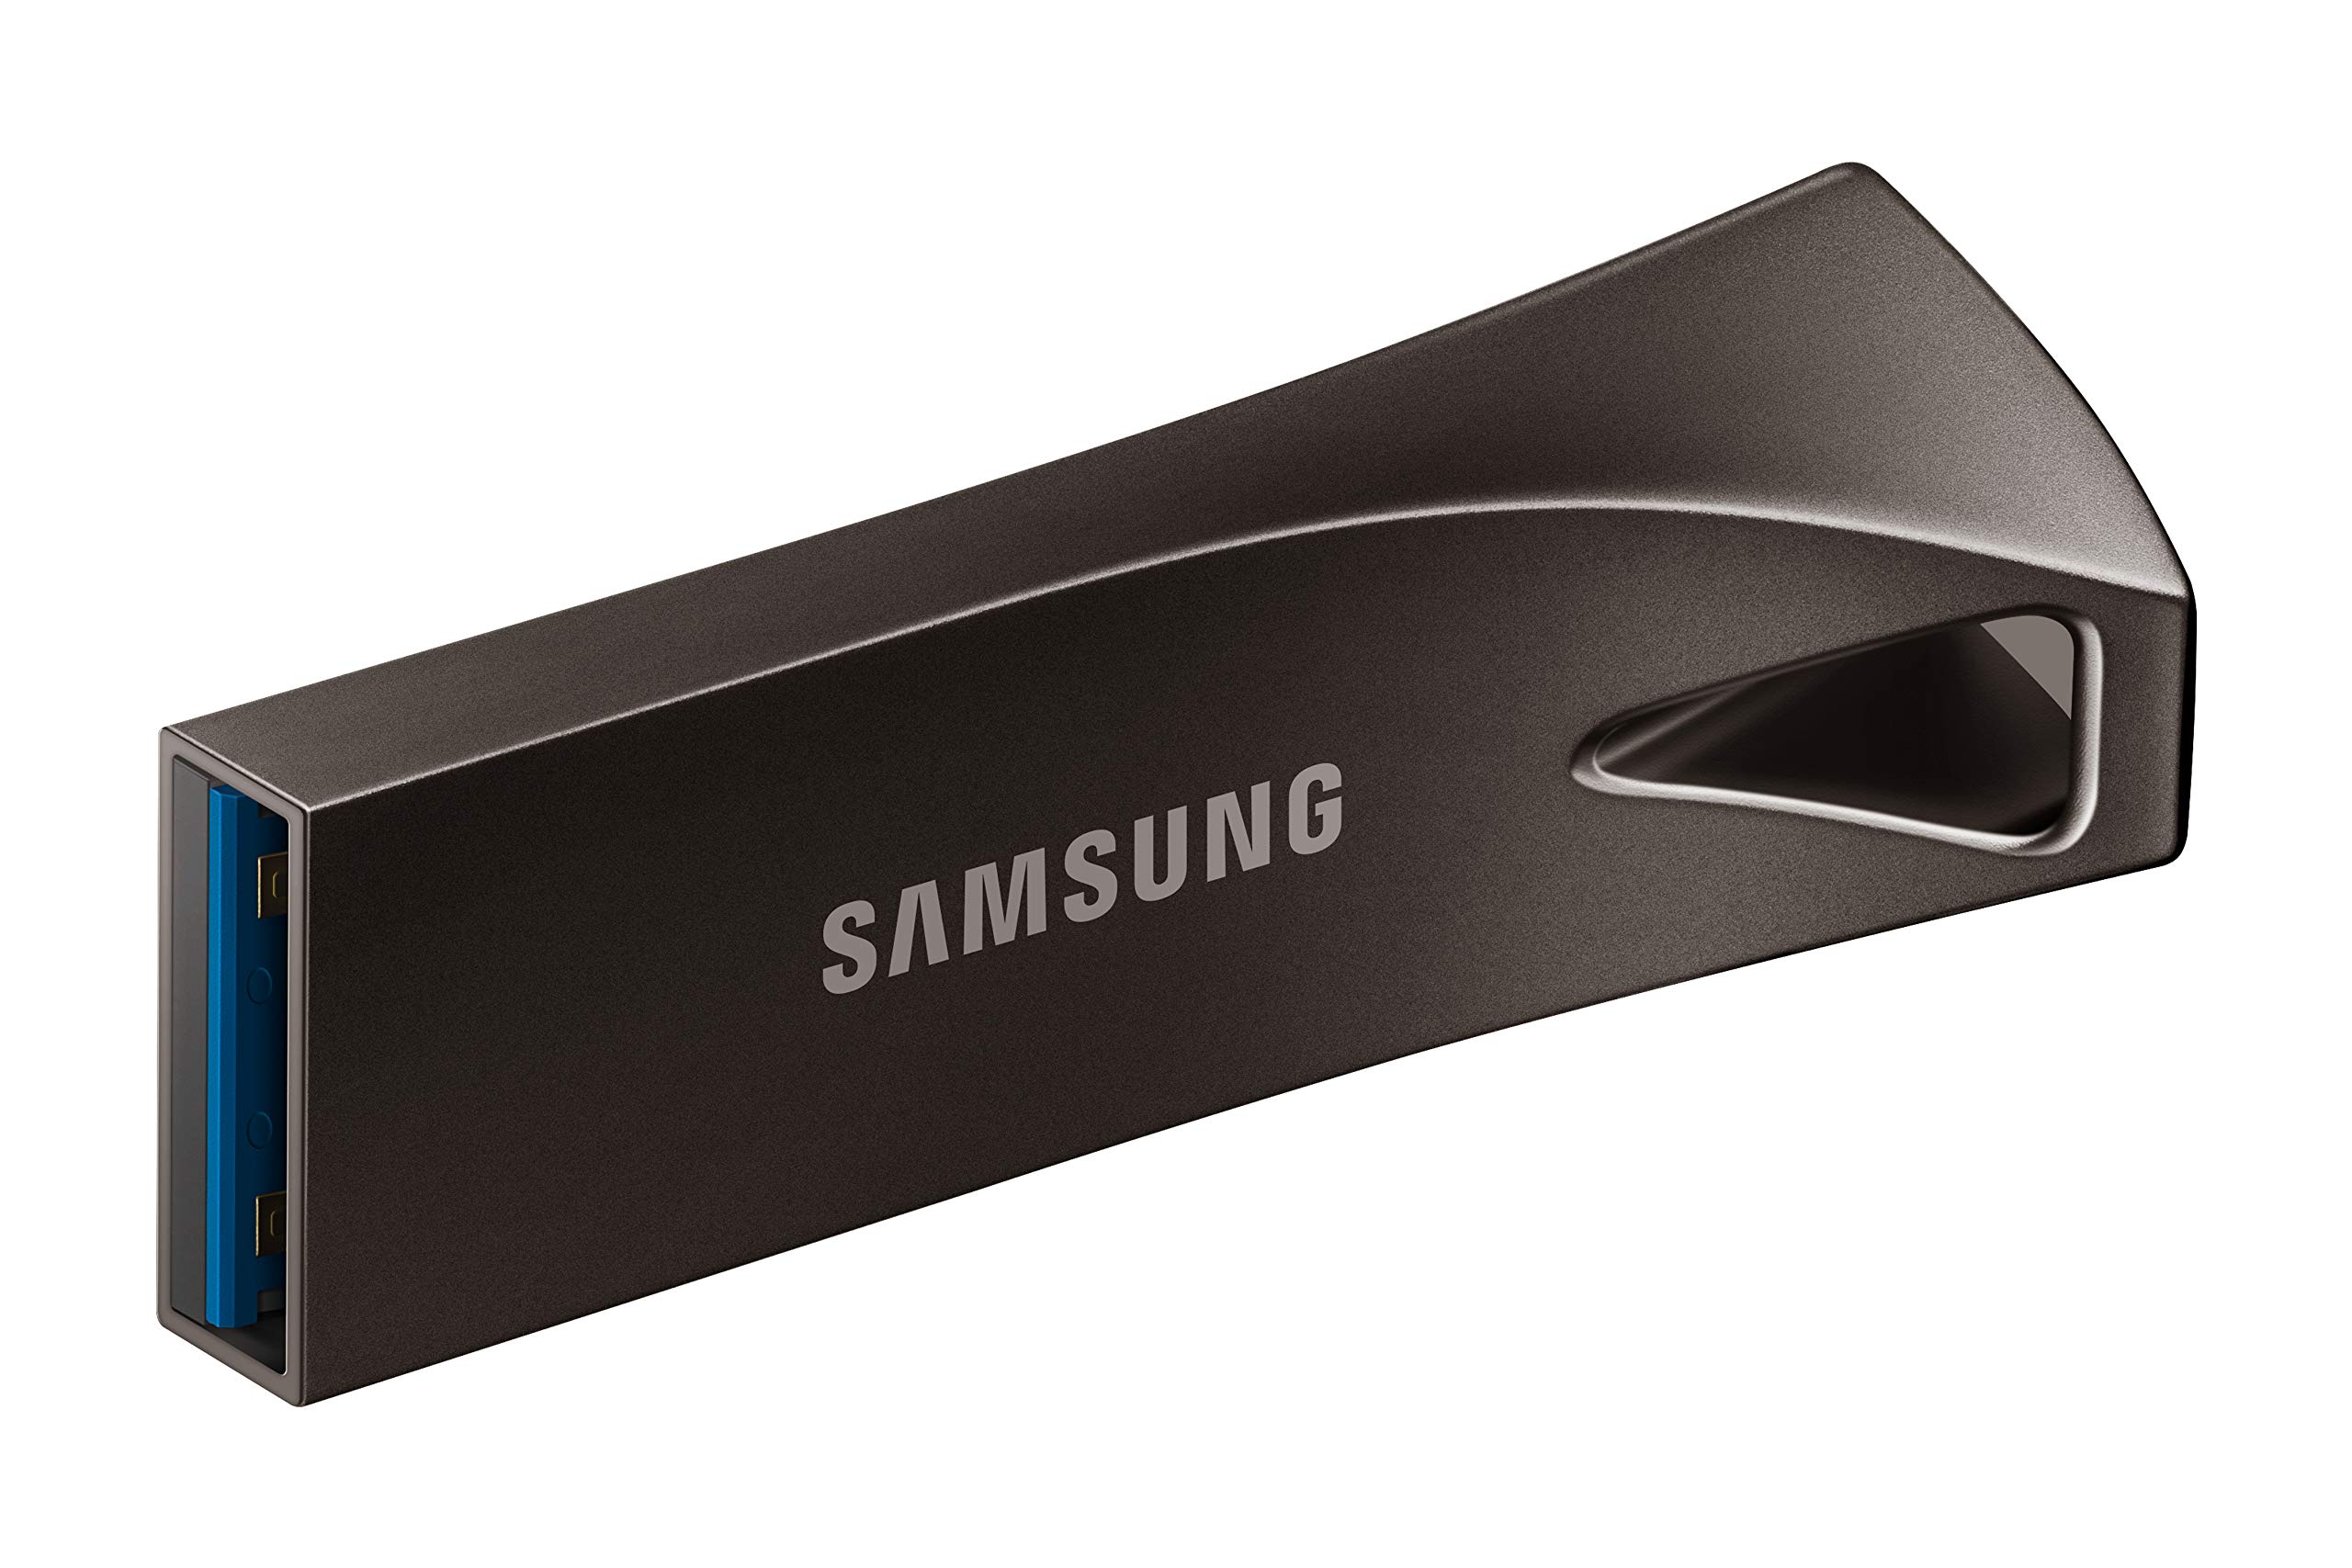 SAMSUNG BAR Plus 3.1 USB Flash Drive, 128GB, 400MB/s, Rugged Metal Casing, Storage Expansion for Photos, Videos, Music, Files, MUF-128BE4/AM, Titan Grey